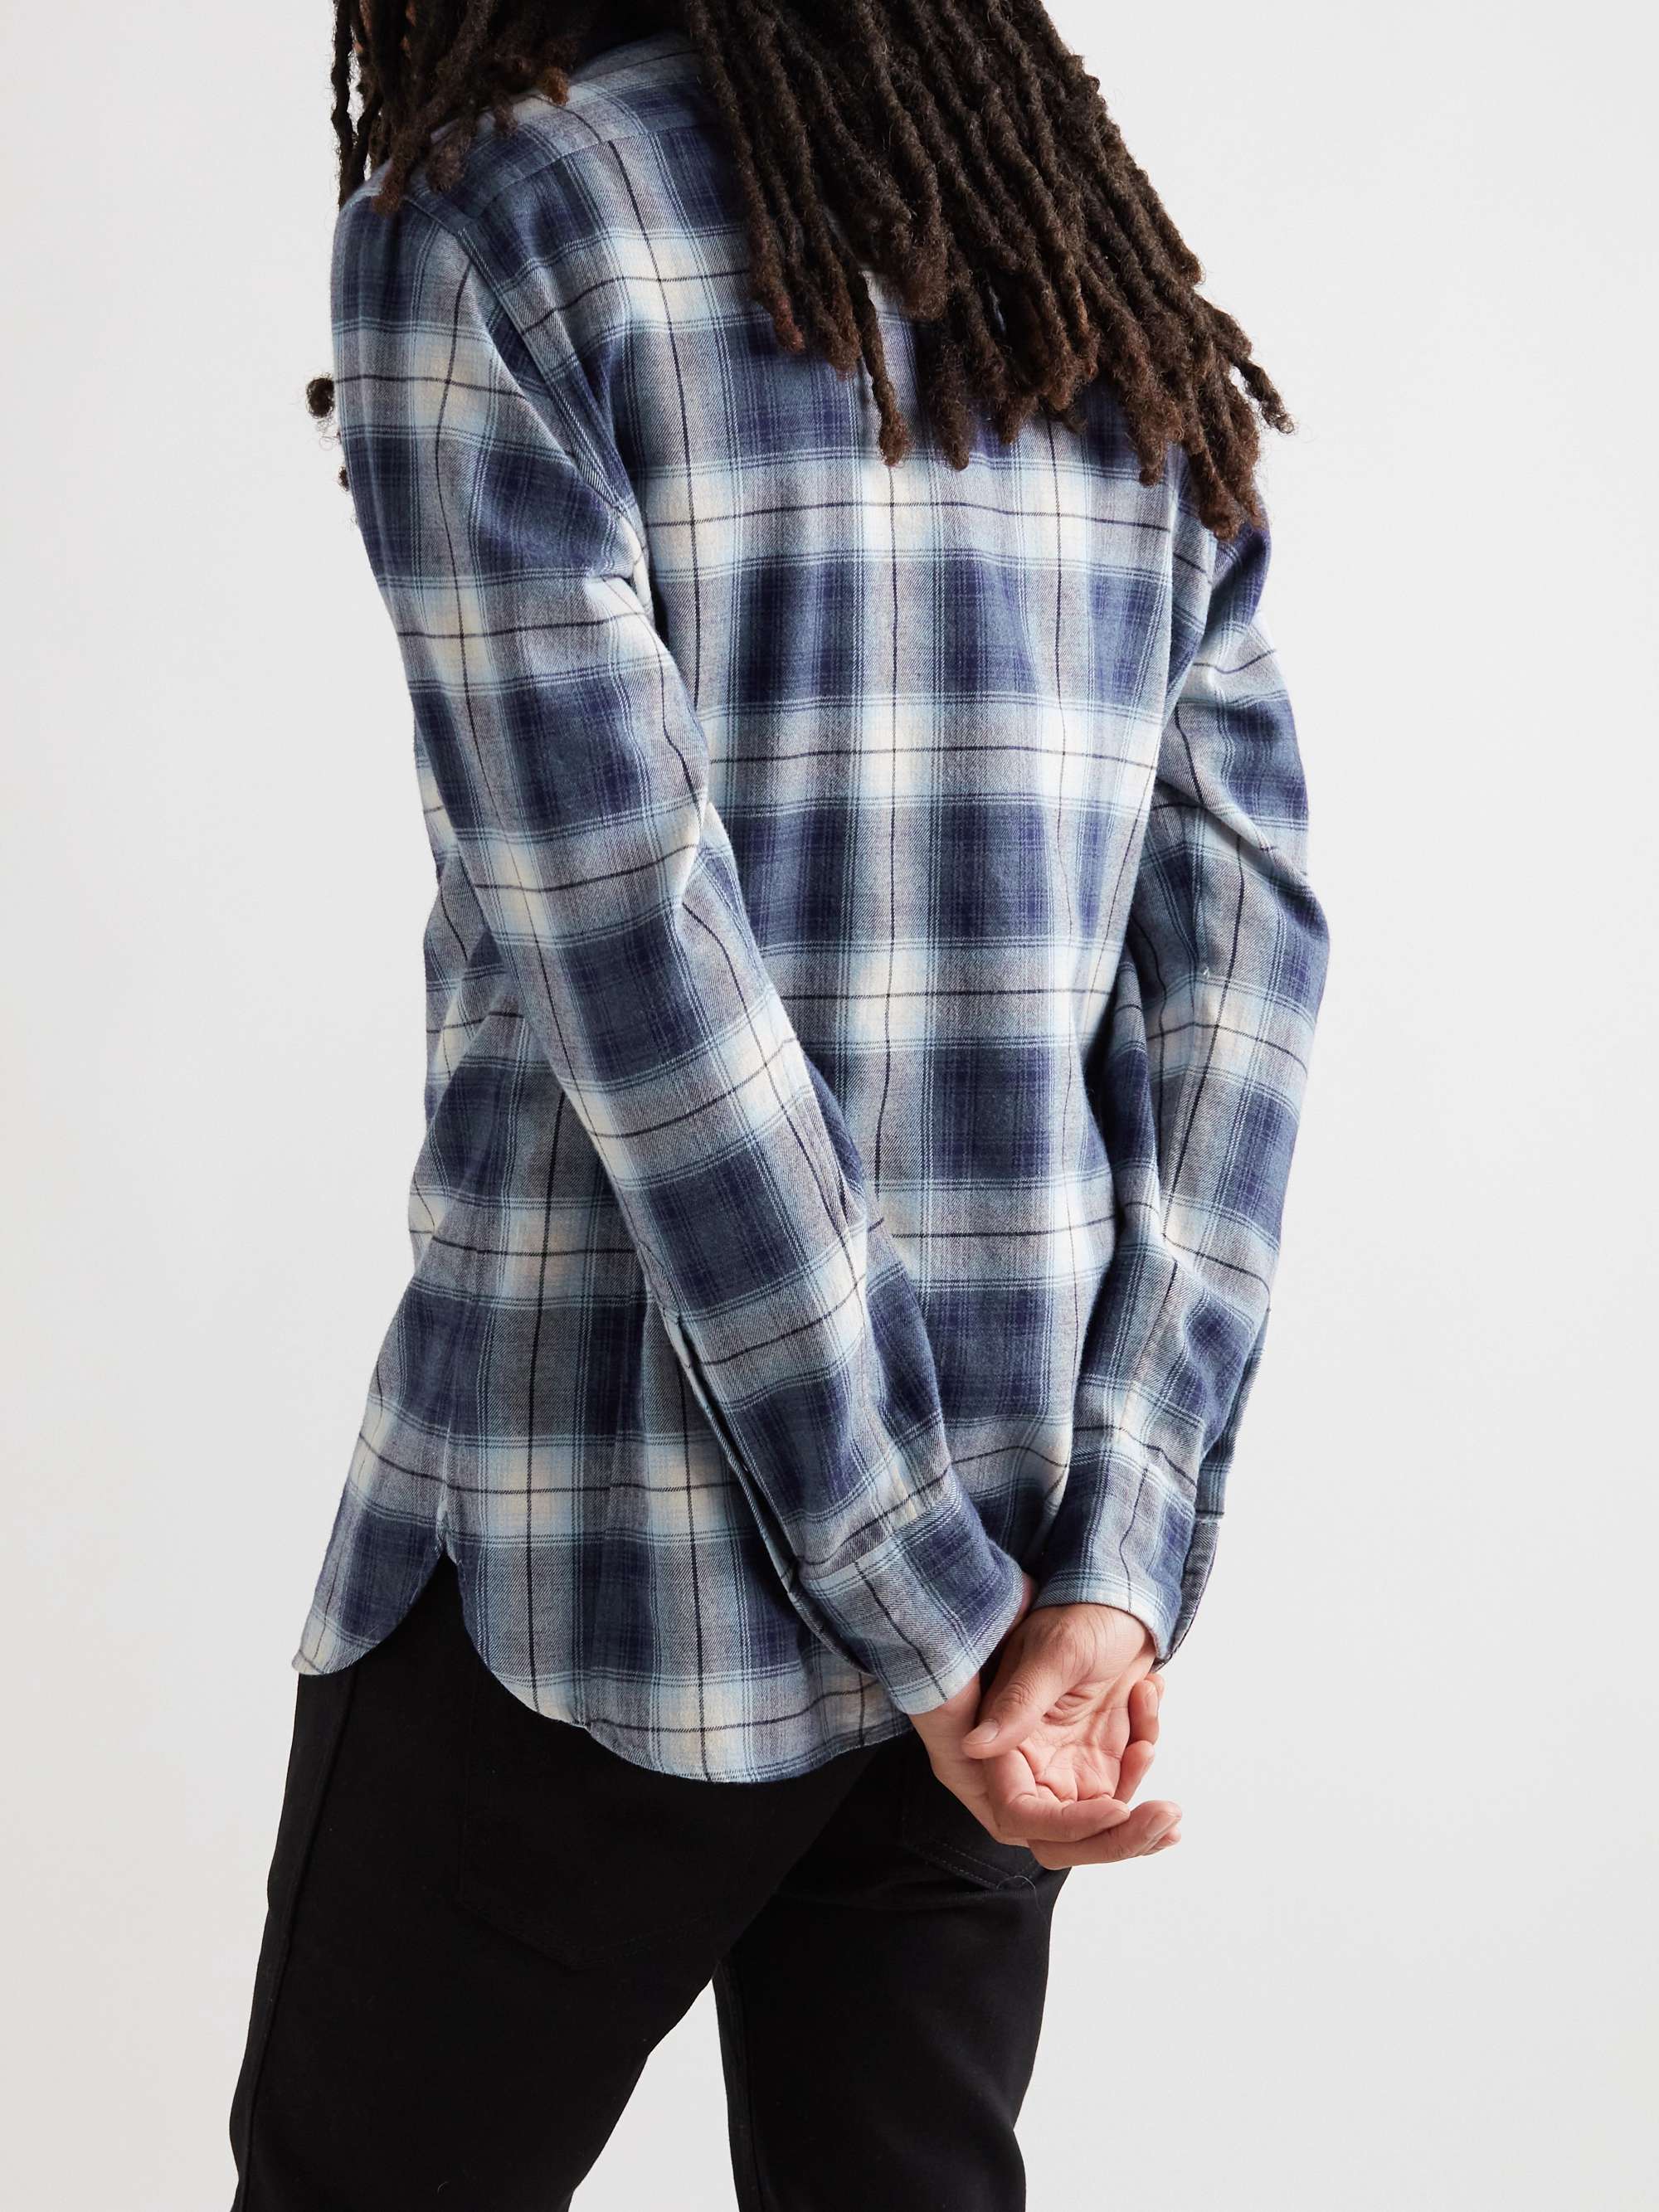 TOM FORD Slim-Fit Checked Cotton-Flannel Shirt